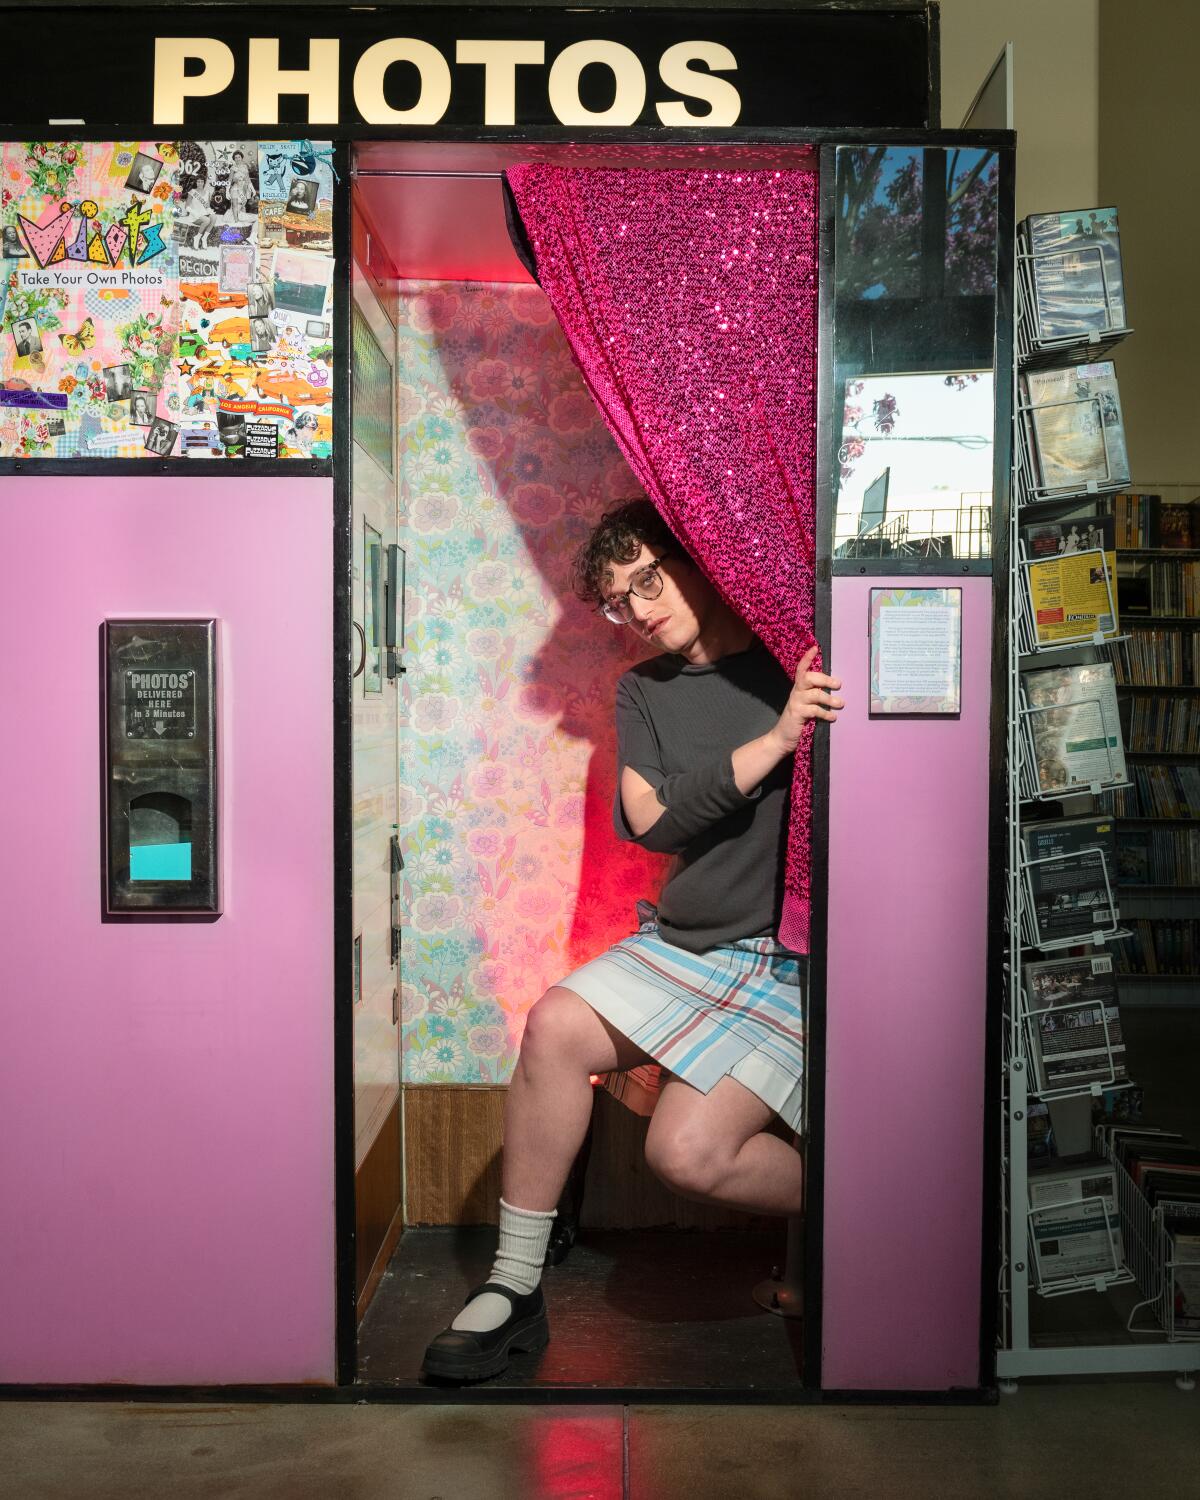 A filmmaker poses in a photobooth.